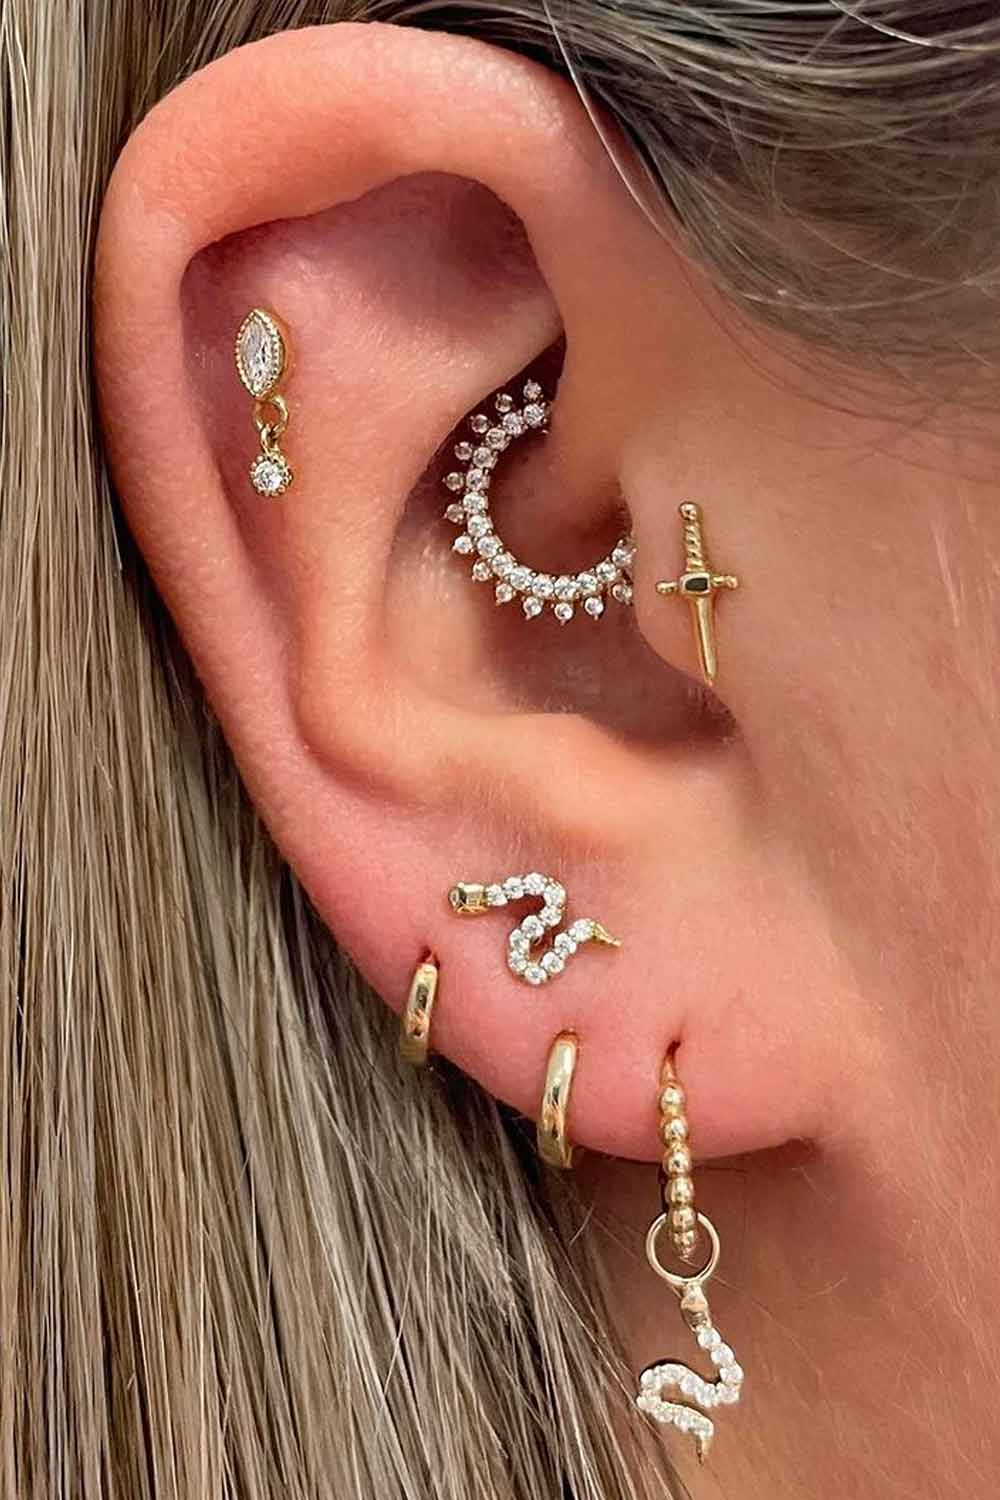 Average Prices for Daith Piercing